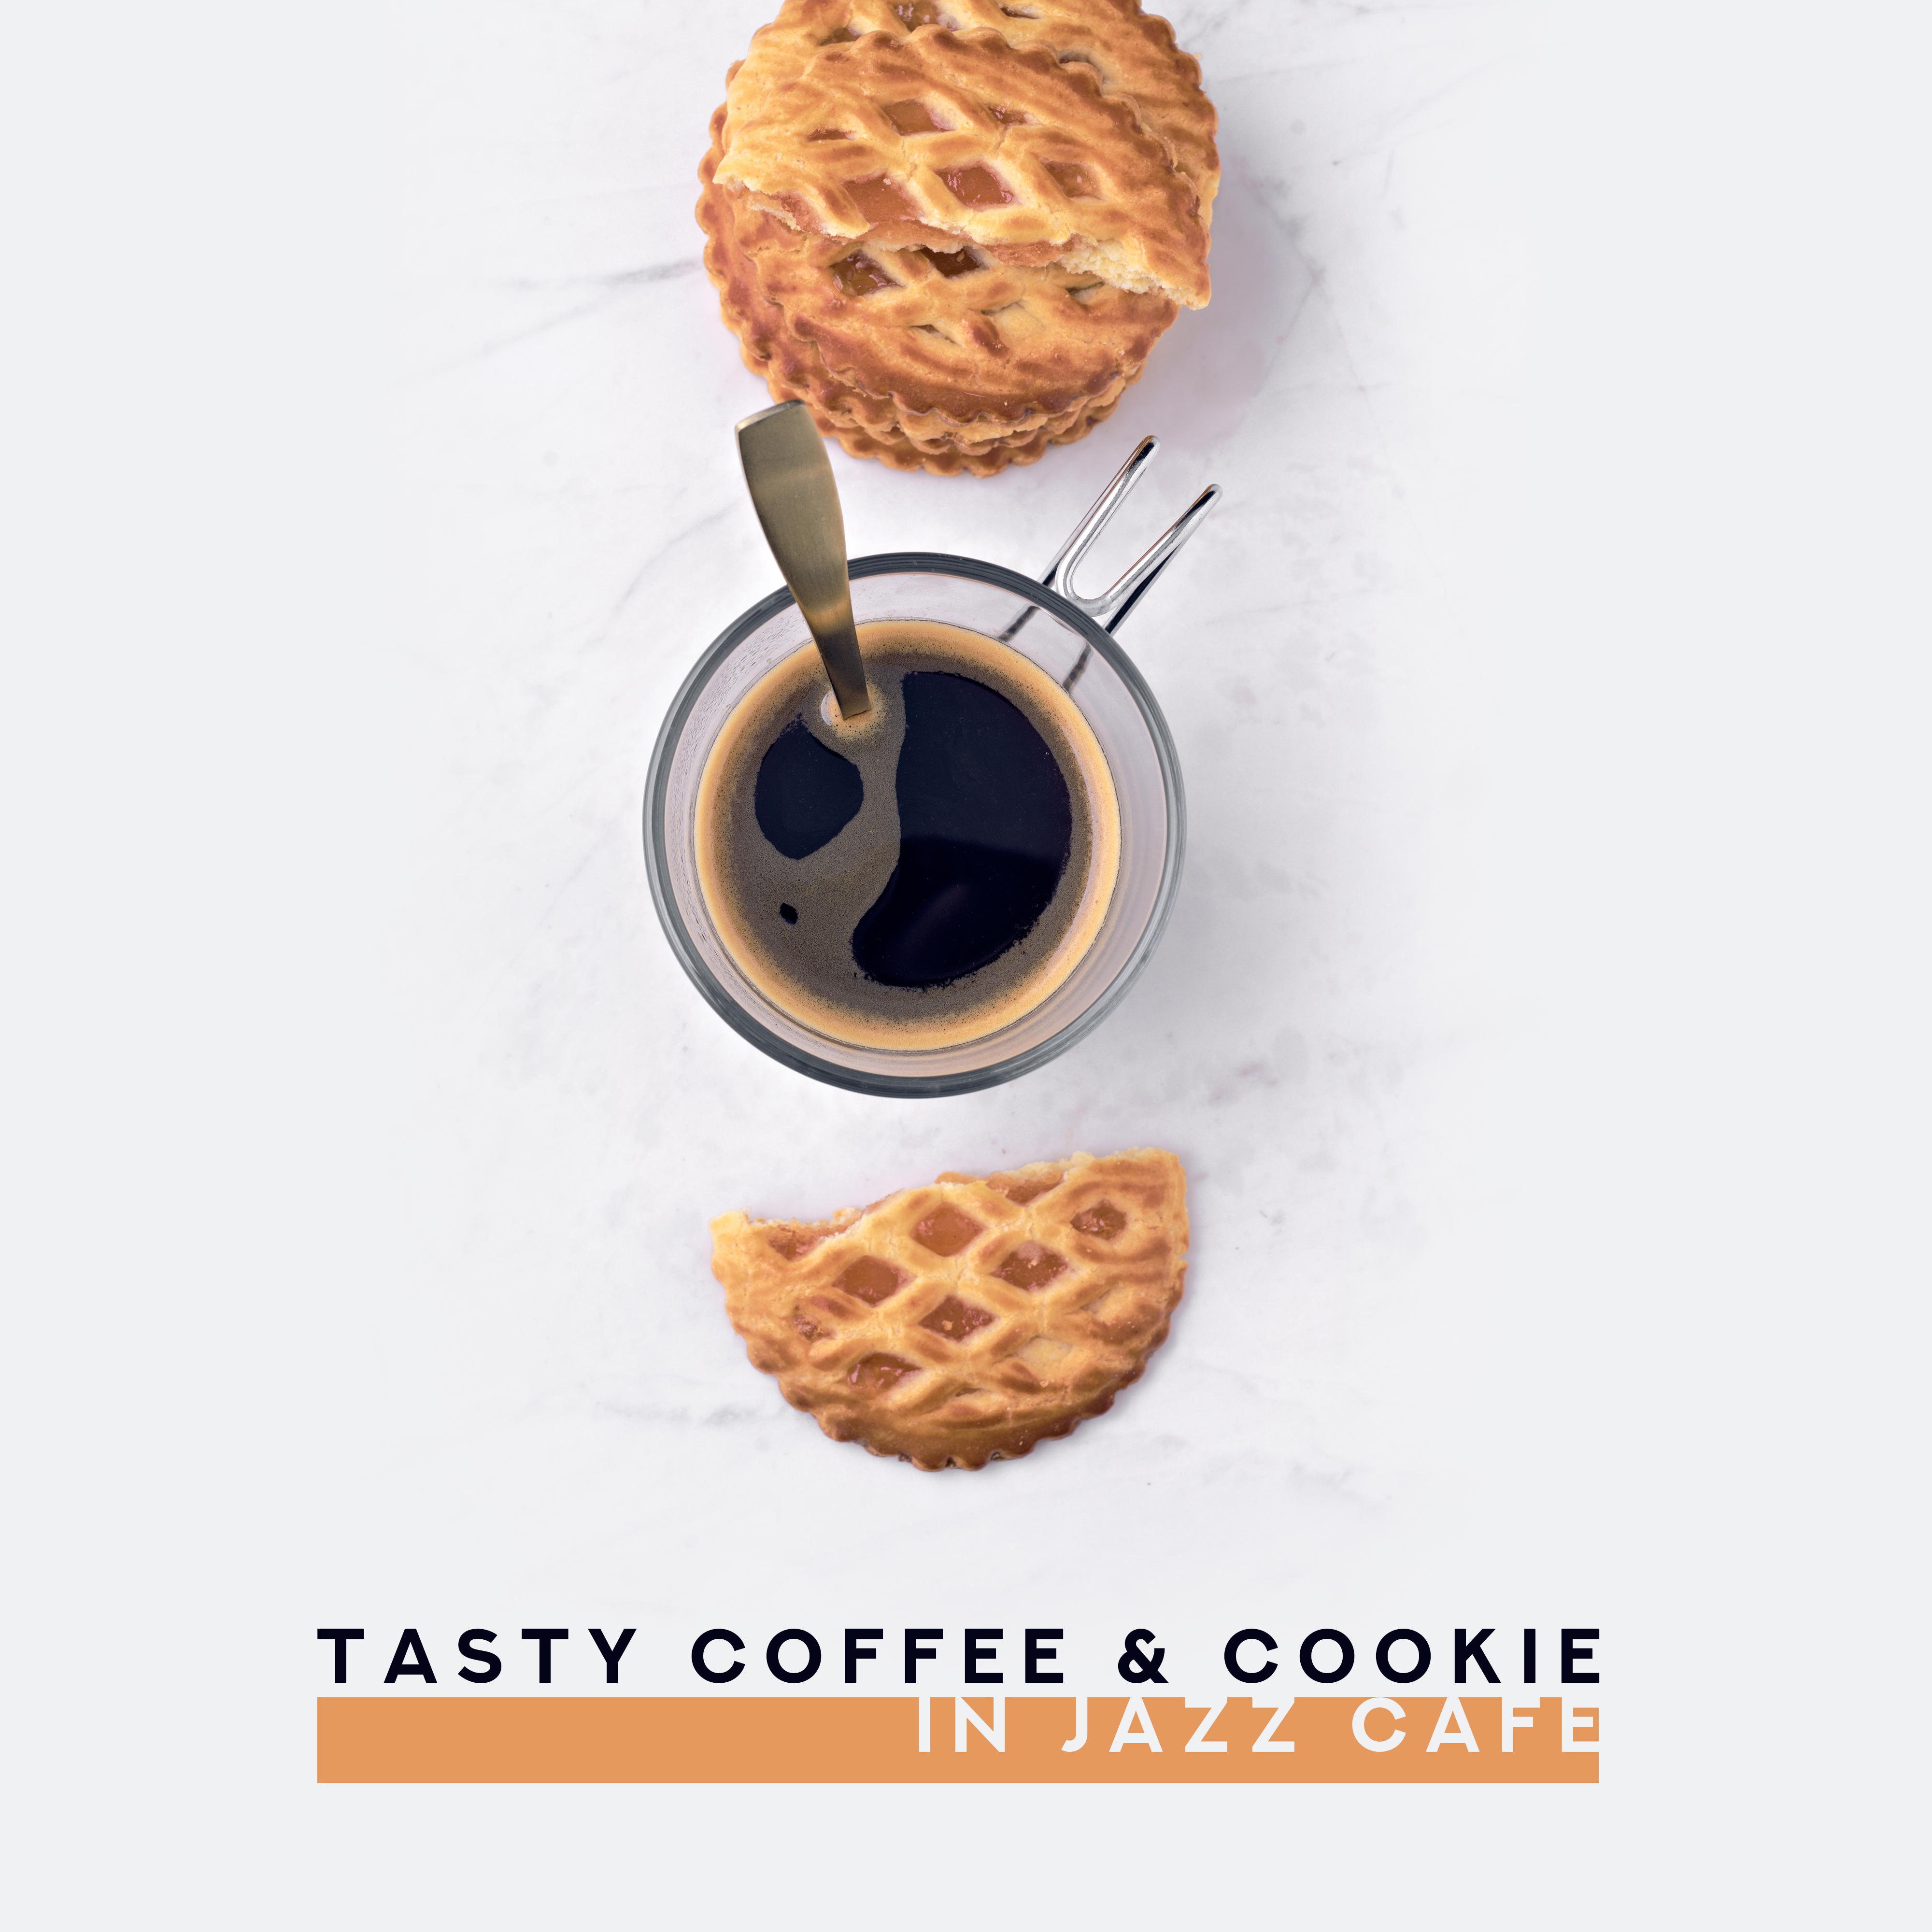 Tasty Coffee & Cookie in Jazz Cafe: Top 2019 Background Smooth Jazz Music, Vintage Instrumental Melodies, Soothing Sounds of Piano, Trumpet, Sax & Others